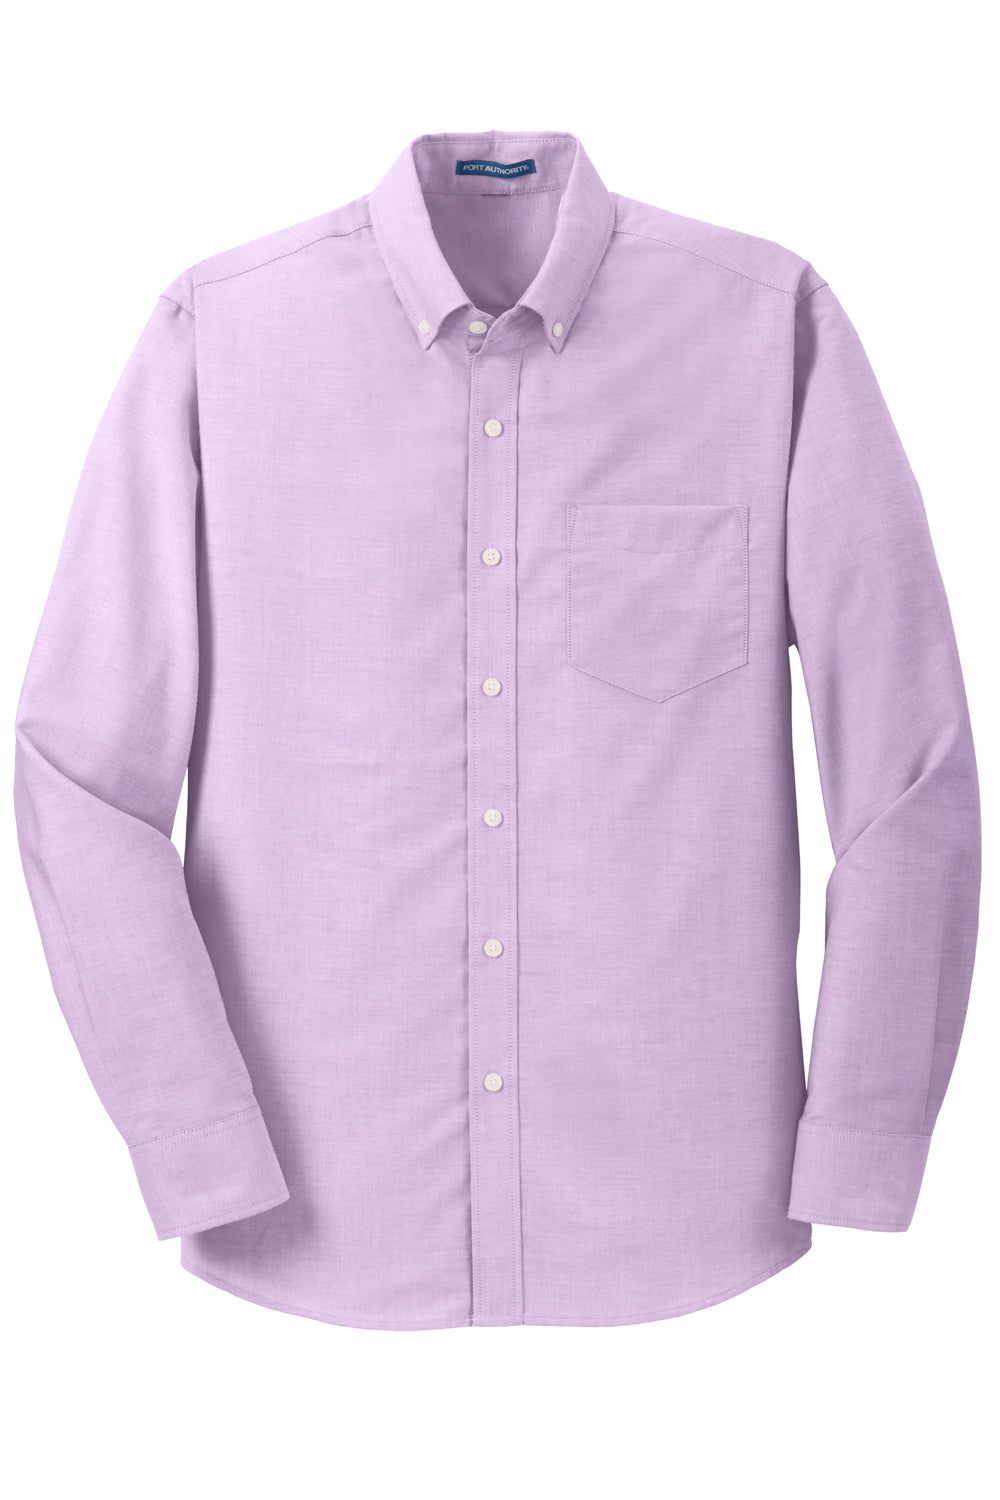 Port Authority S658/TS658 SuperPro Oxford Wrinkle Resistant Long Sleeve Button Down Shirt w/ Pocket Soft Purple Flat Front